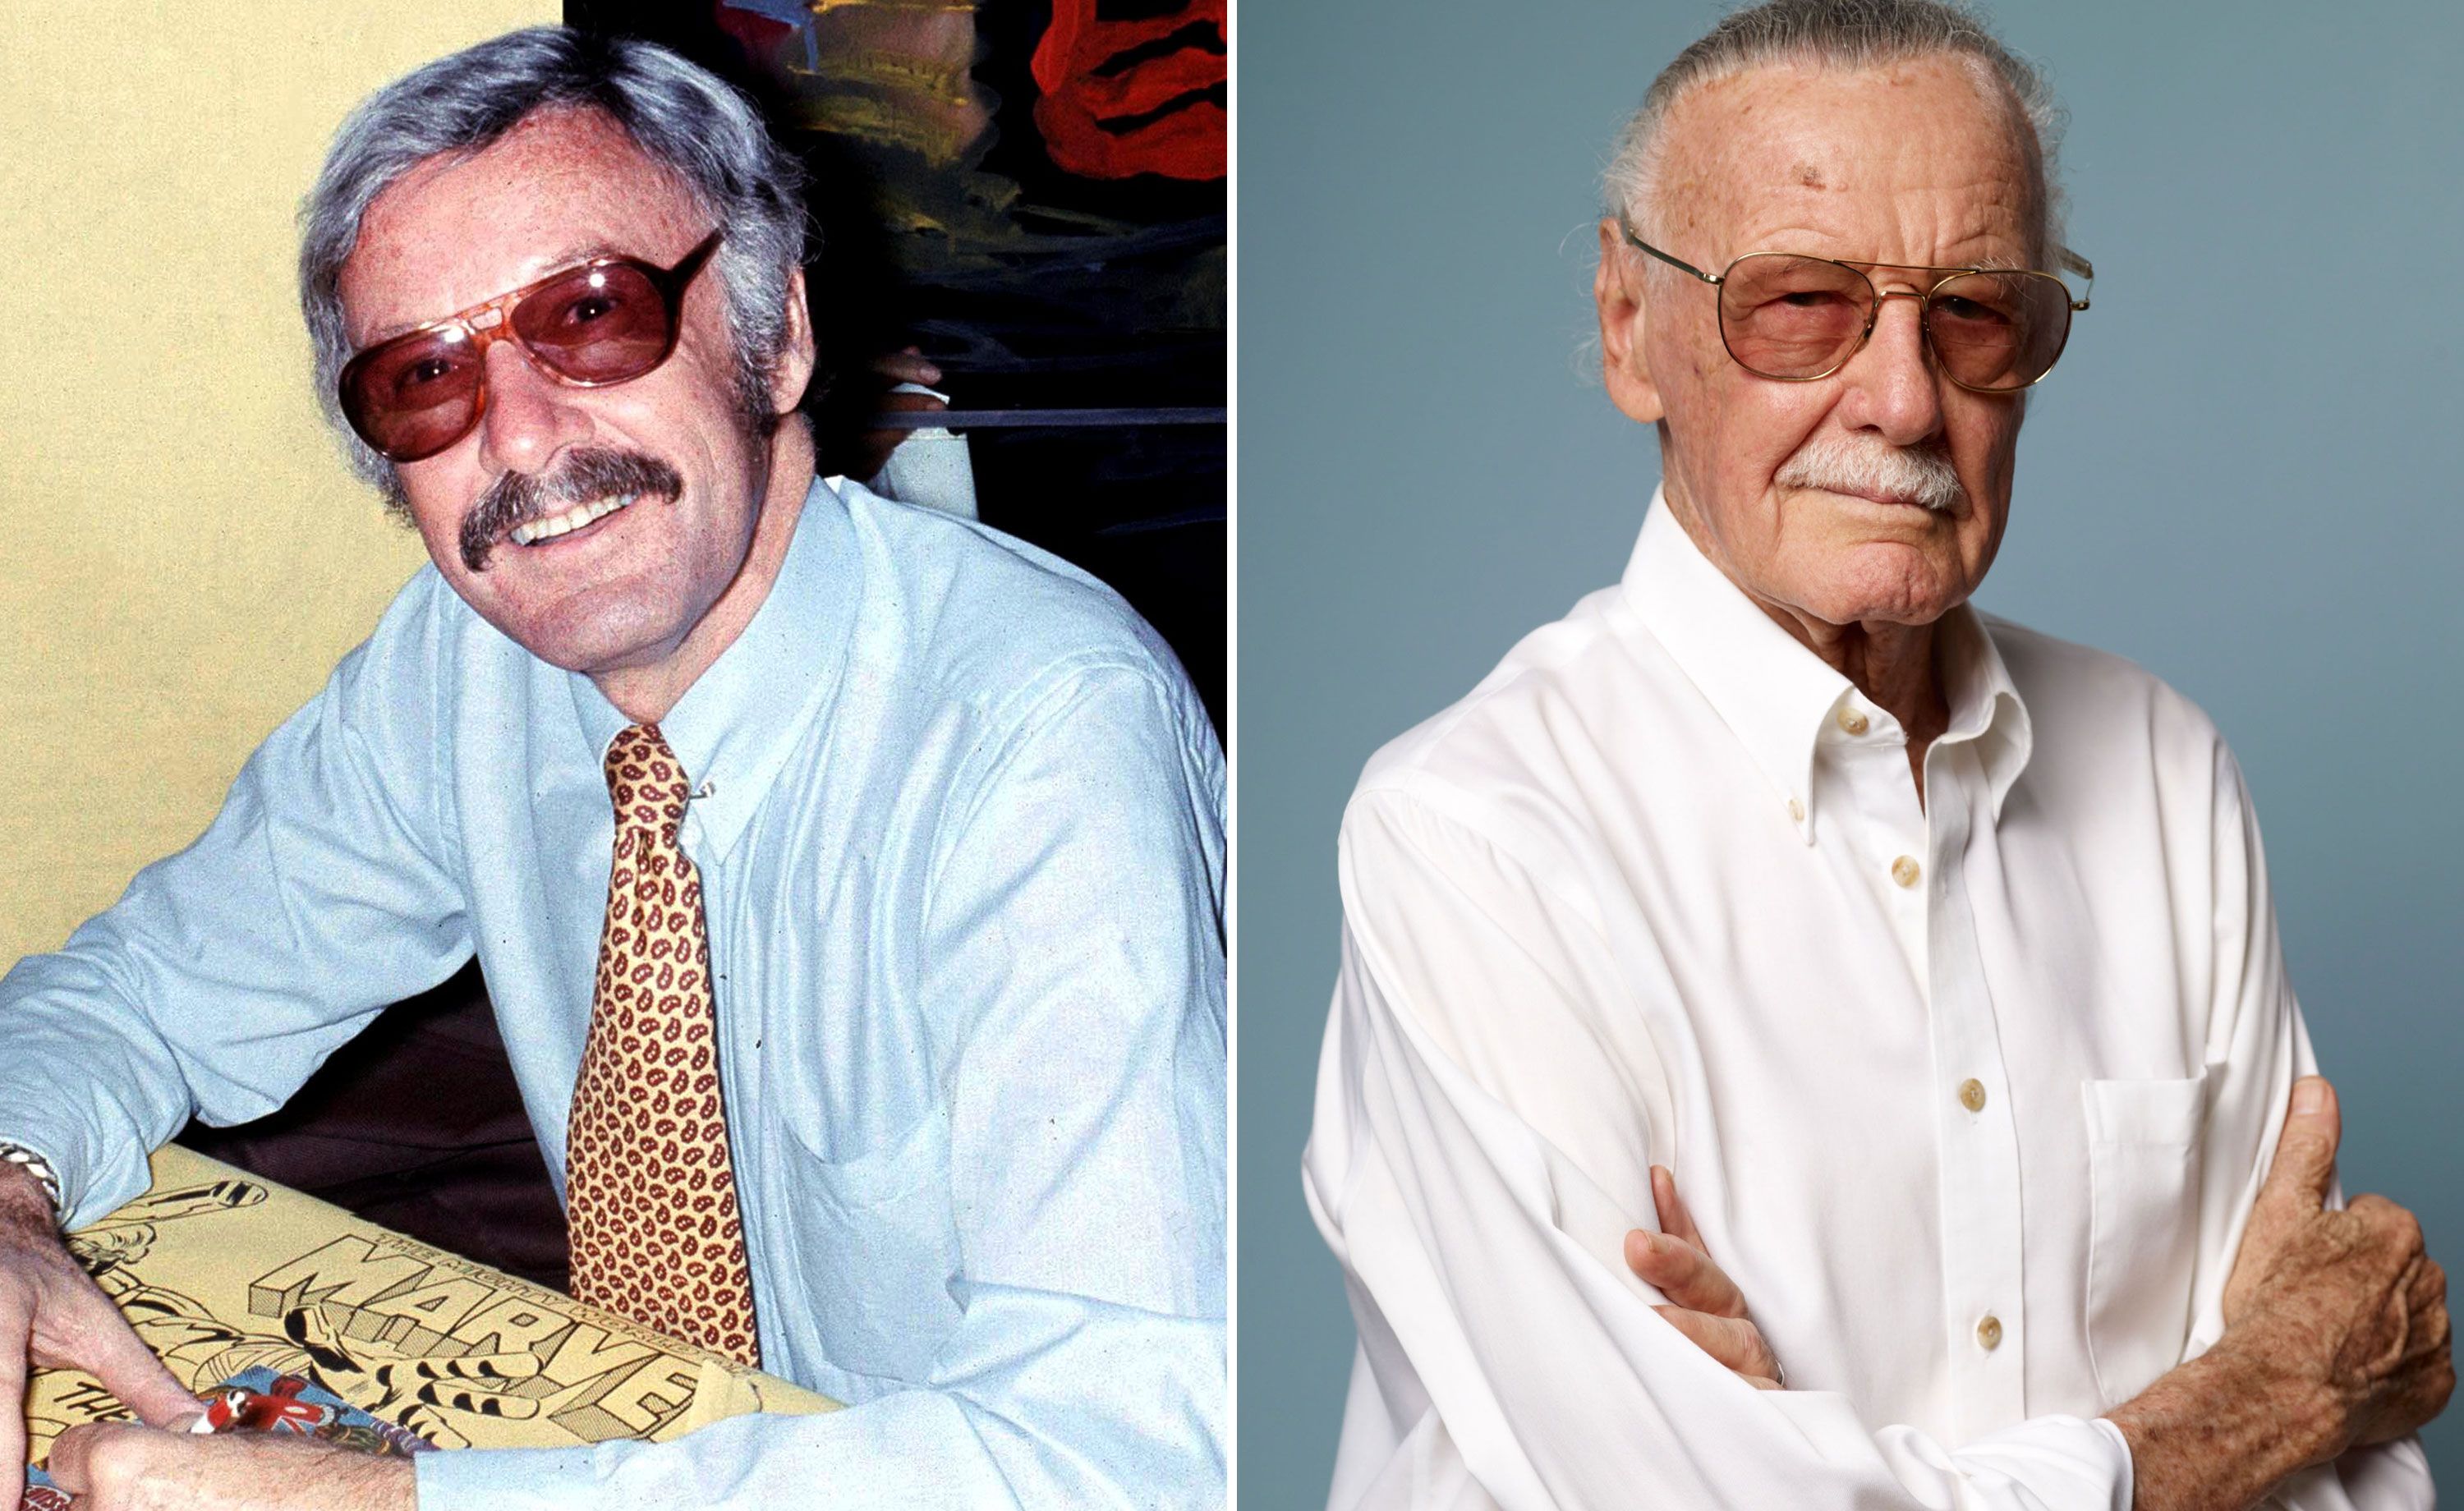 stan lee without glasses